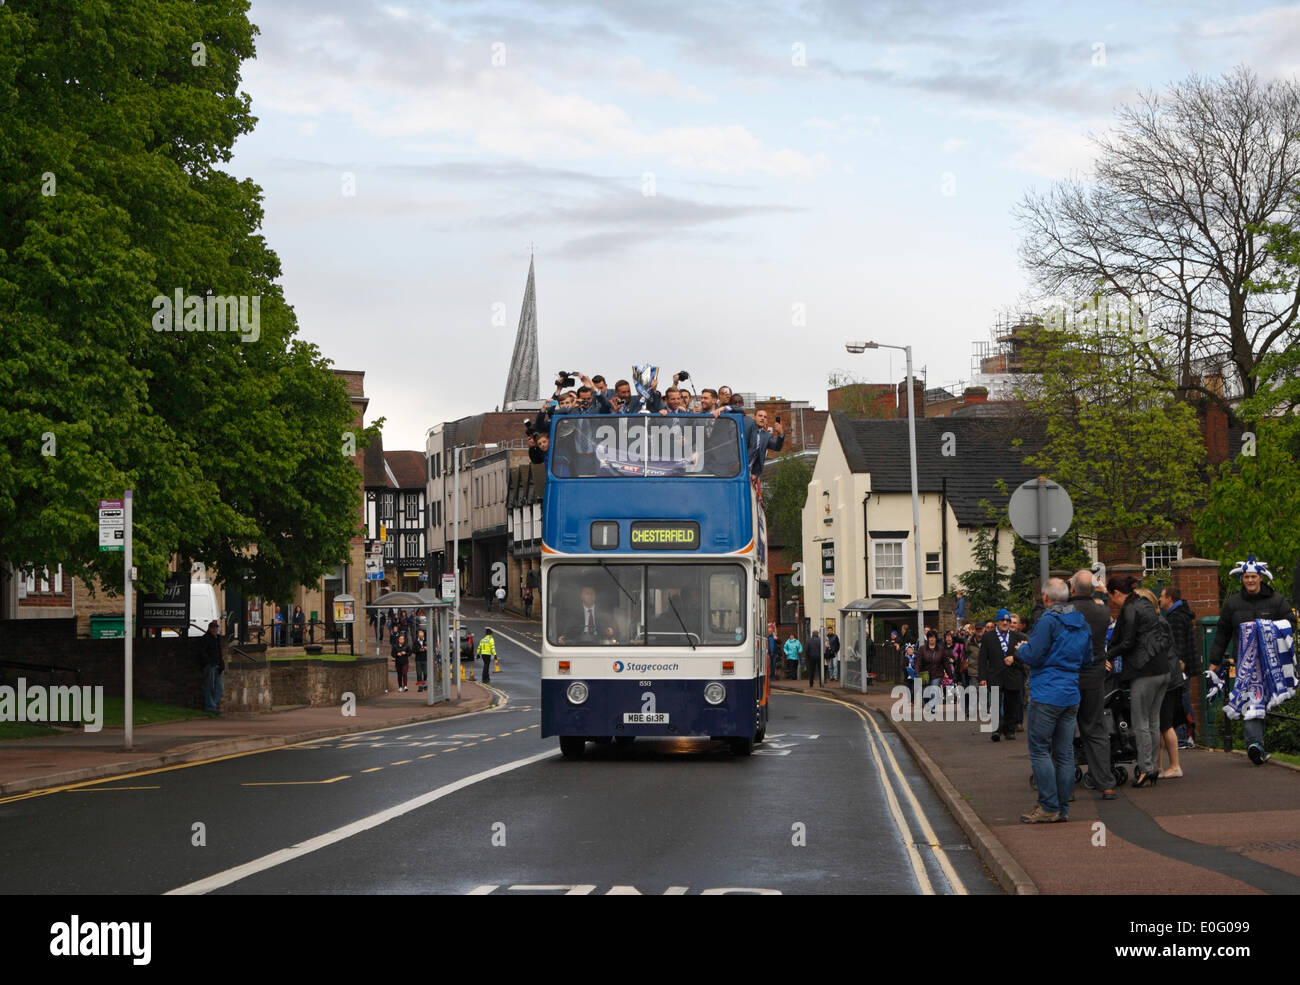 Chesterfield, UK 12th May, 2014. Chesterfield F.C. football team, league 2 champions, open top bus parade and civic reception at Chesterfield town hall Derbyshire England, UK Monday 12th May 2014 Stock Photo